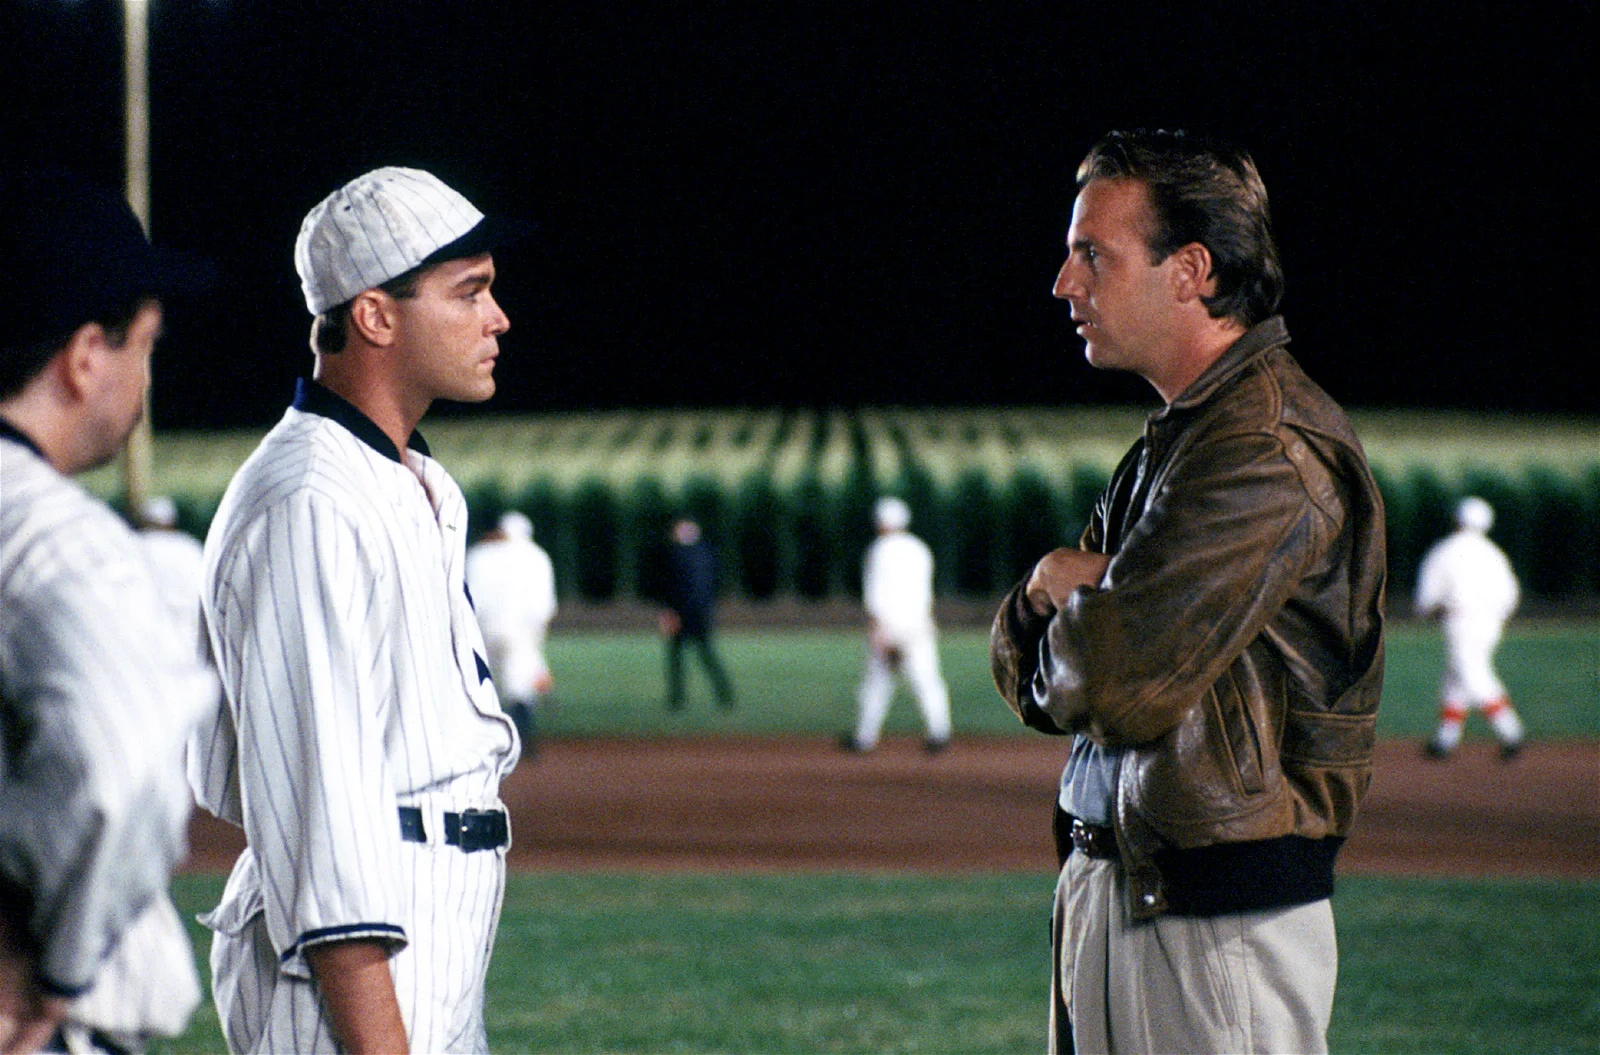 Kevin Costner and Ray Liotta